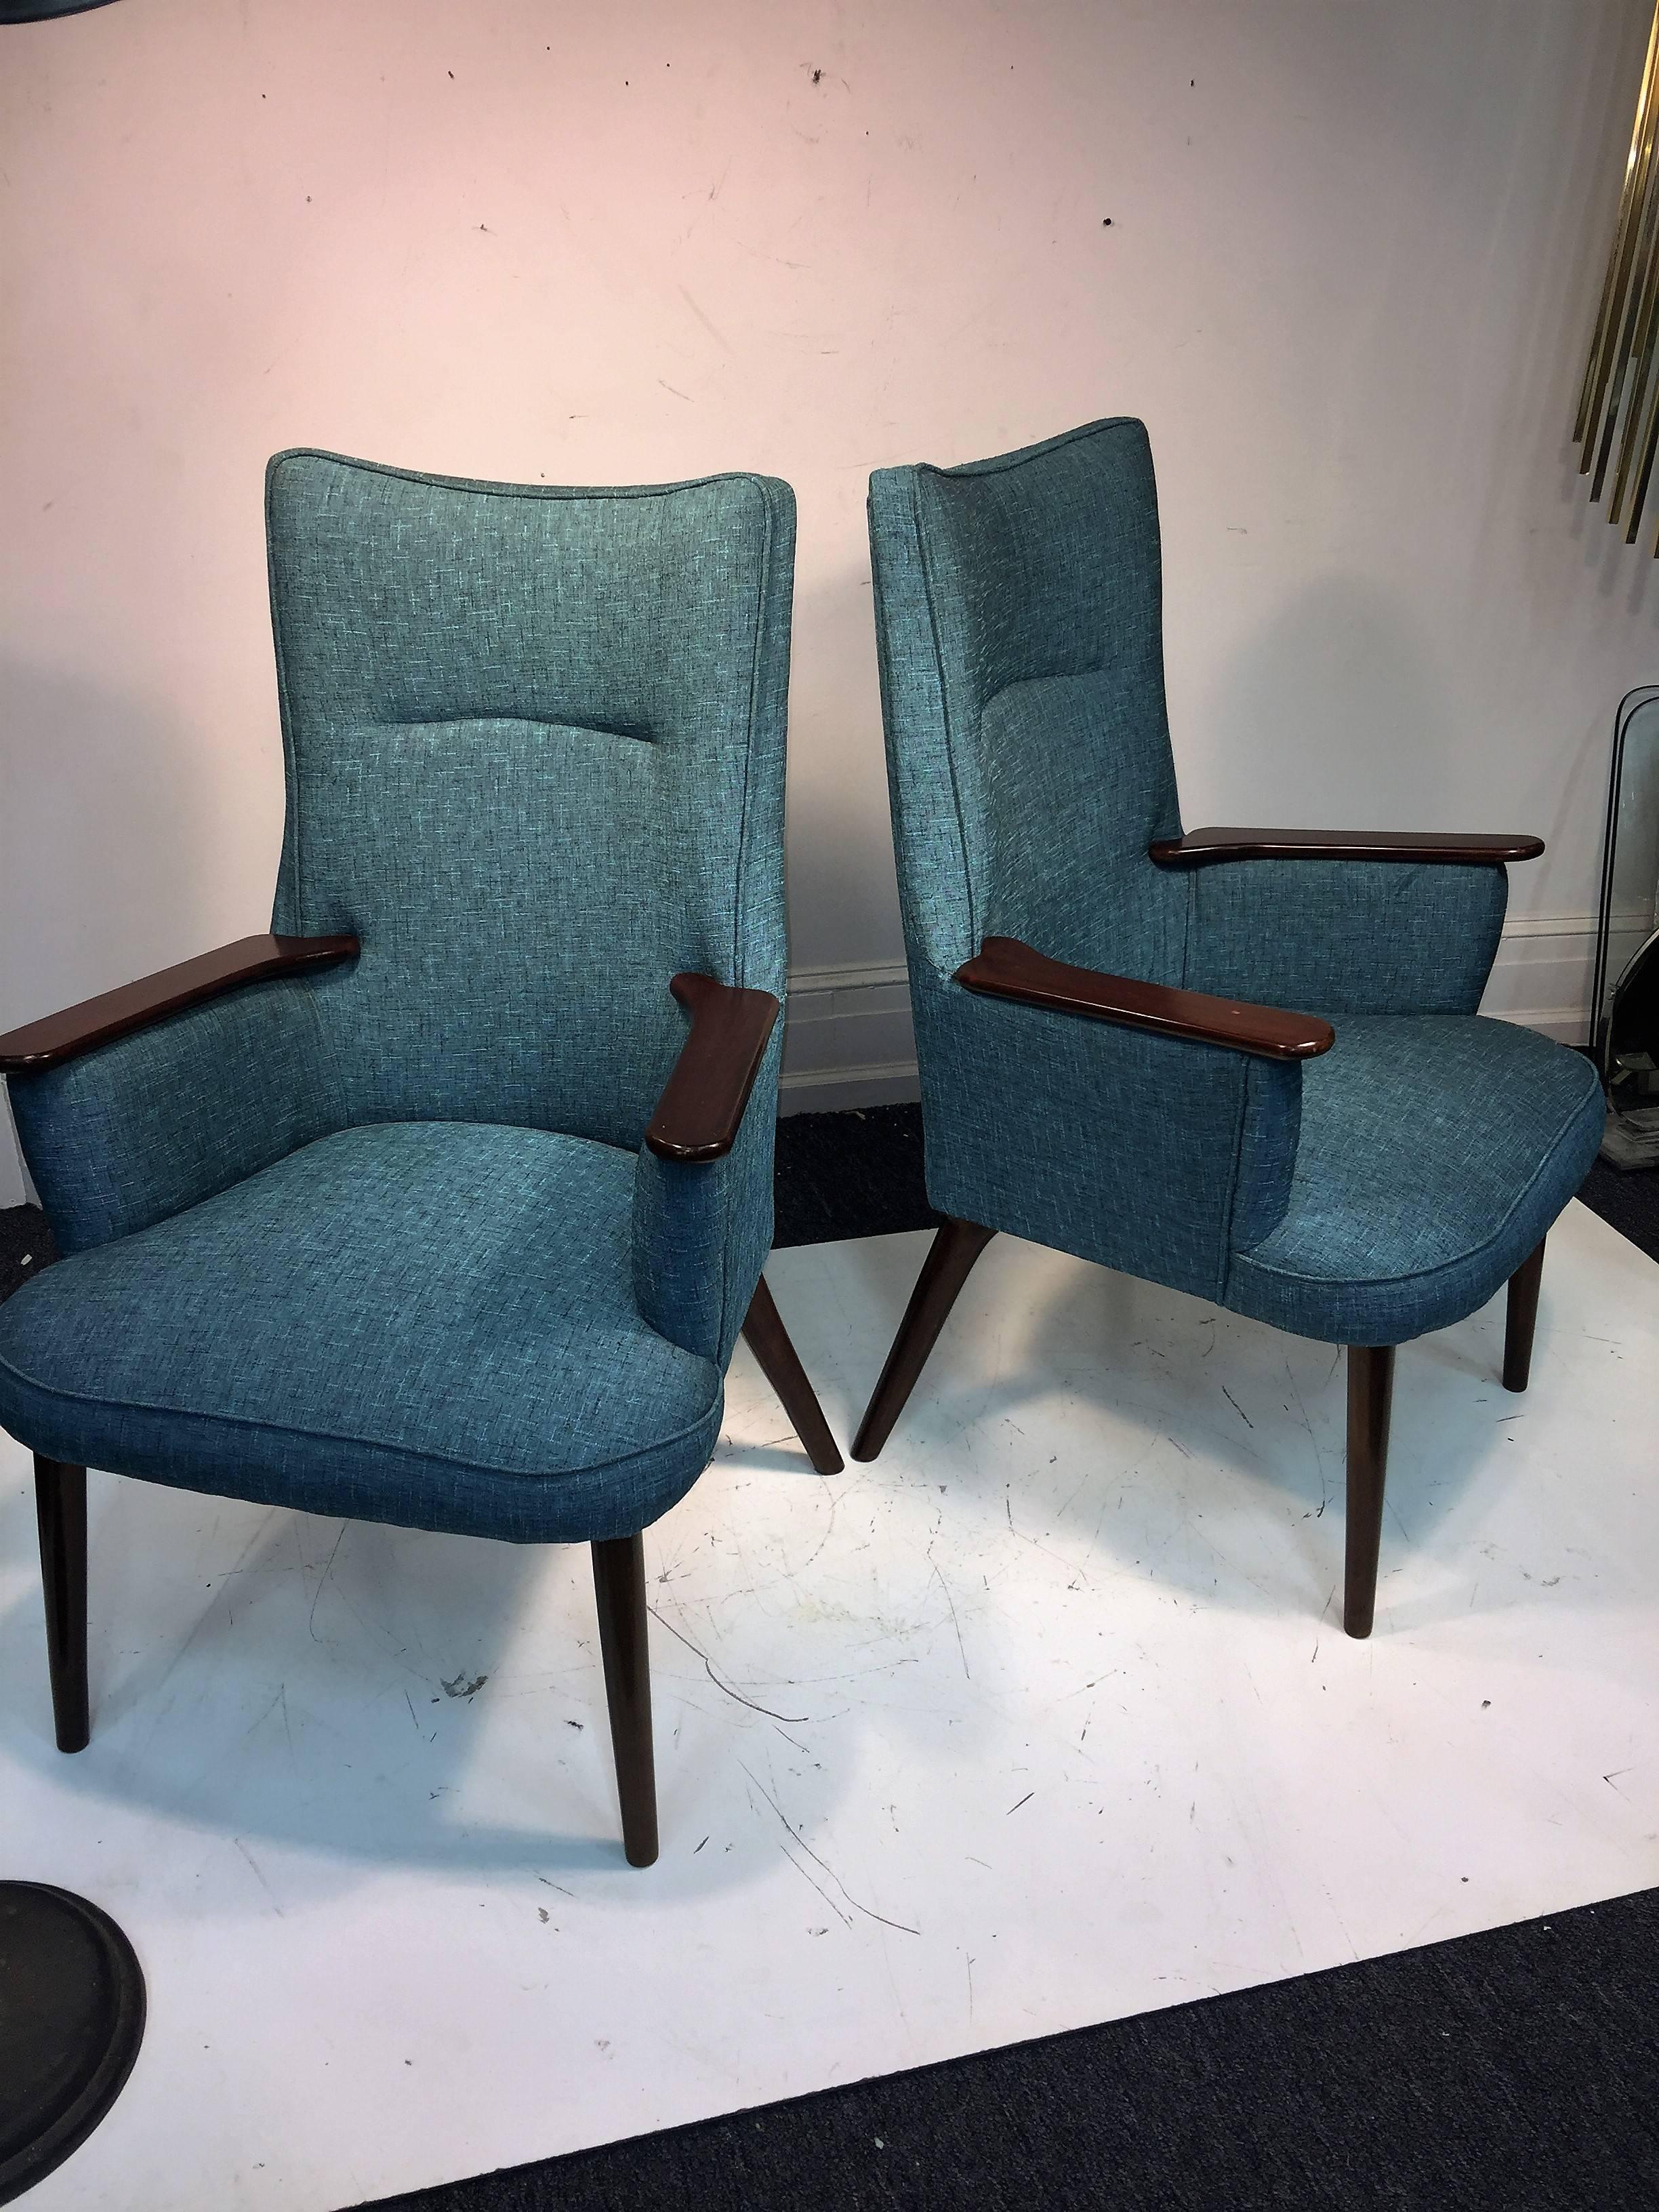 Nice original Mid-Century textured aqua blue or black threaded upholstered armchairs with great teak splayed legs and armrests. Cool curved backs and comfortable seats. Great for your living room.